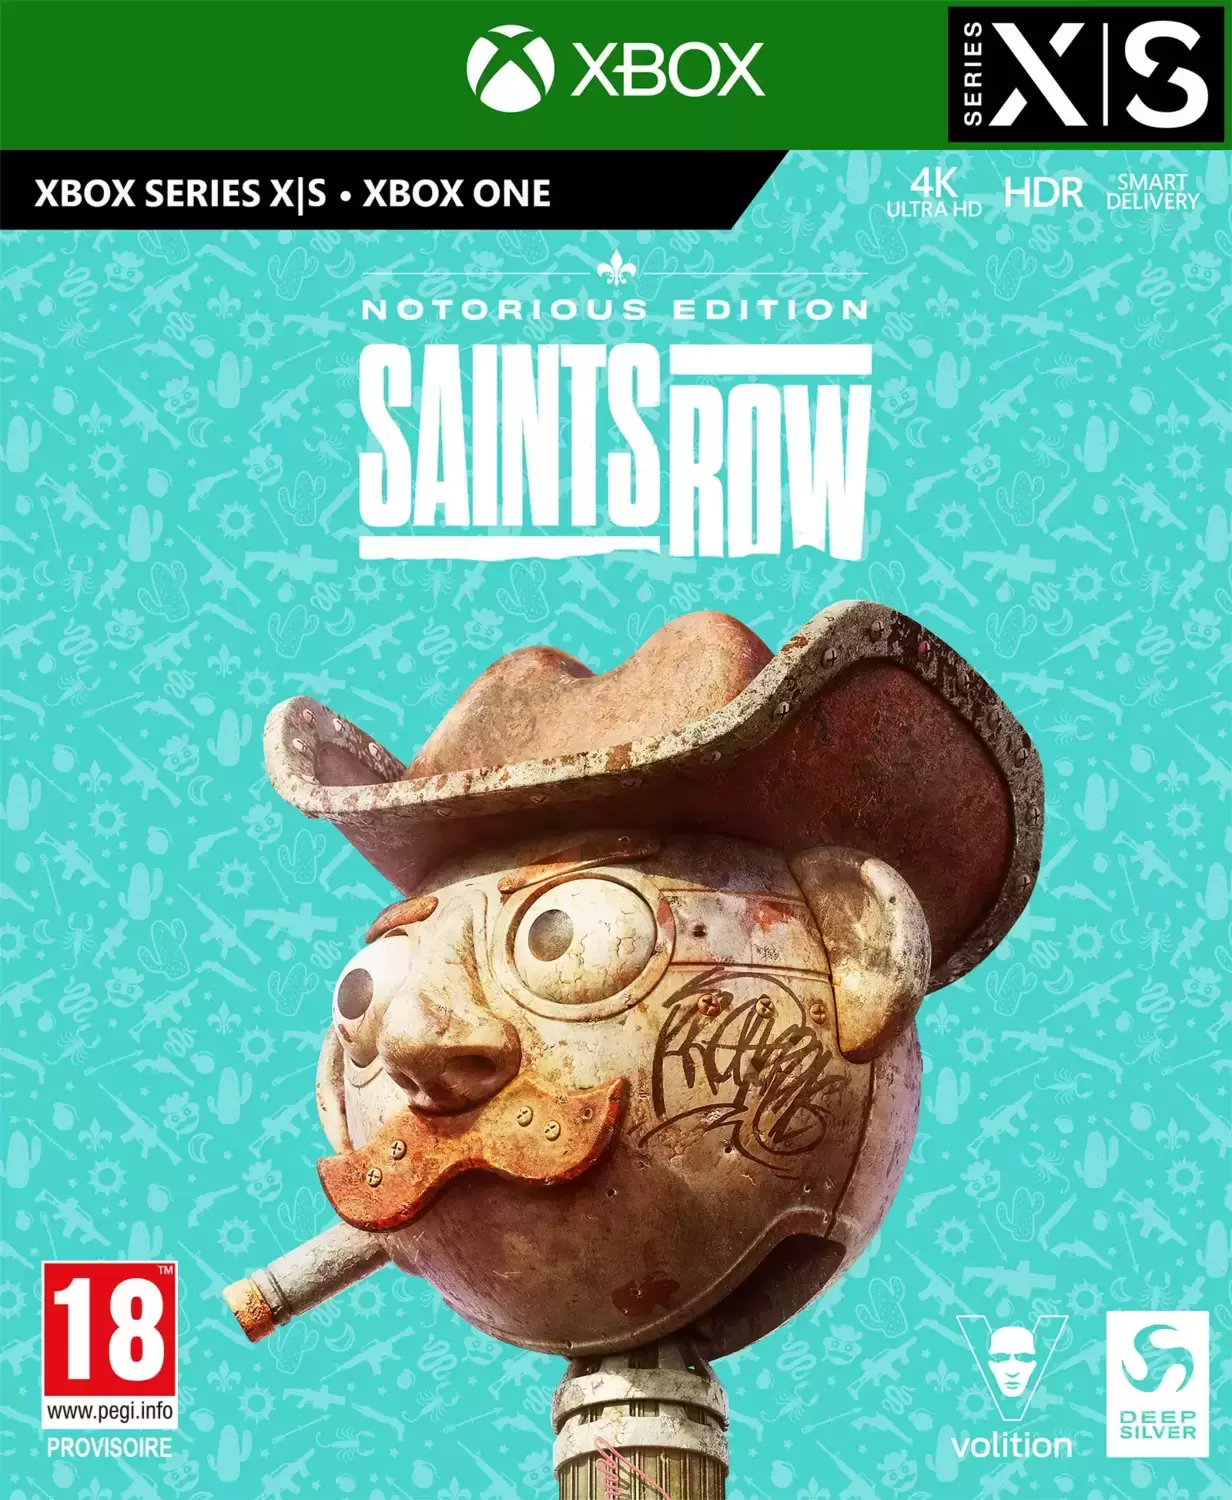 XBOX One Games - Saints Row Notorious Edition